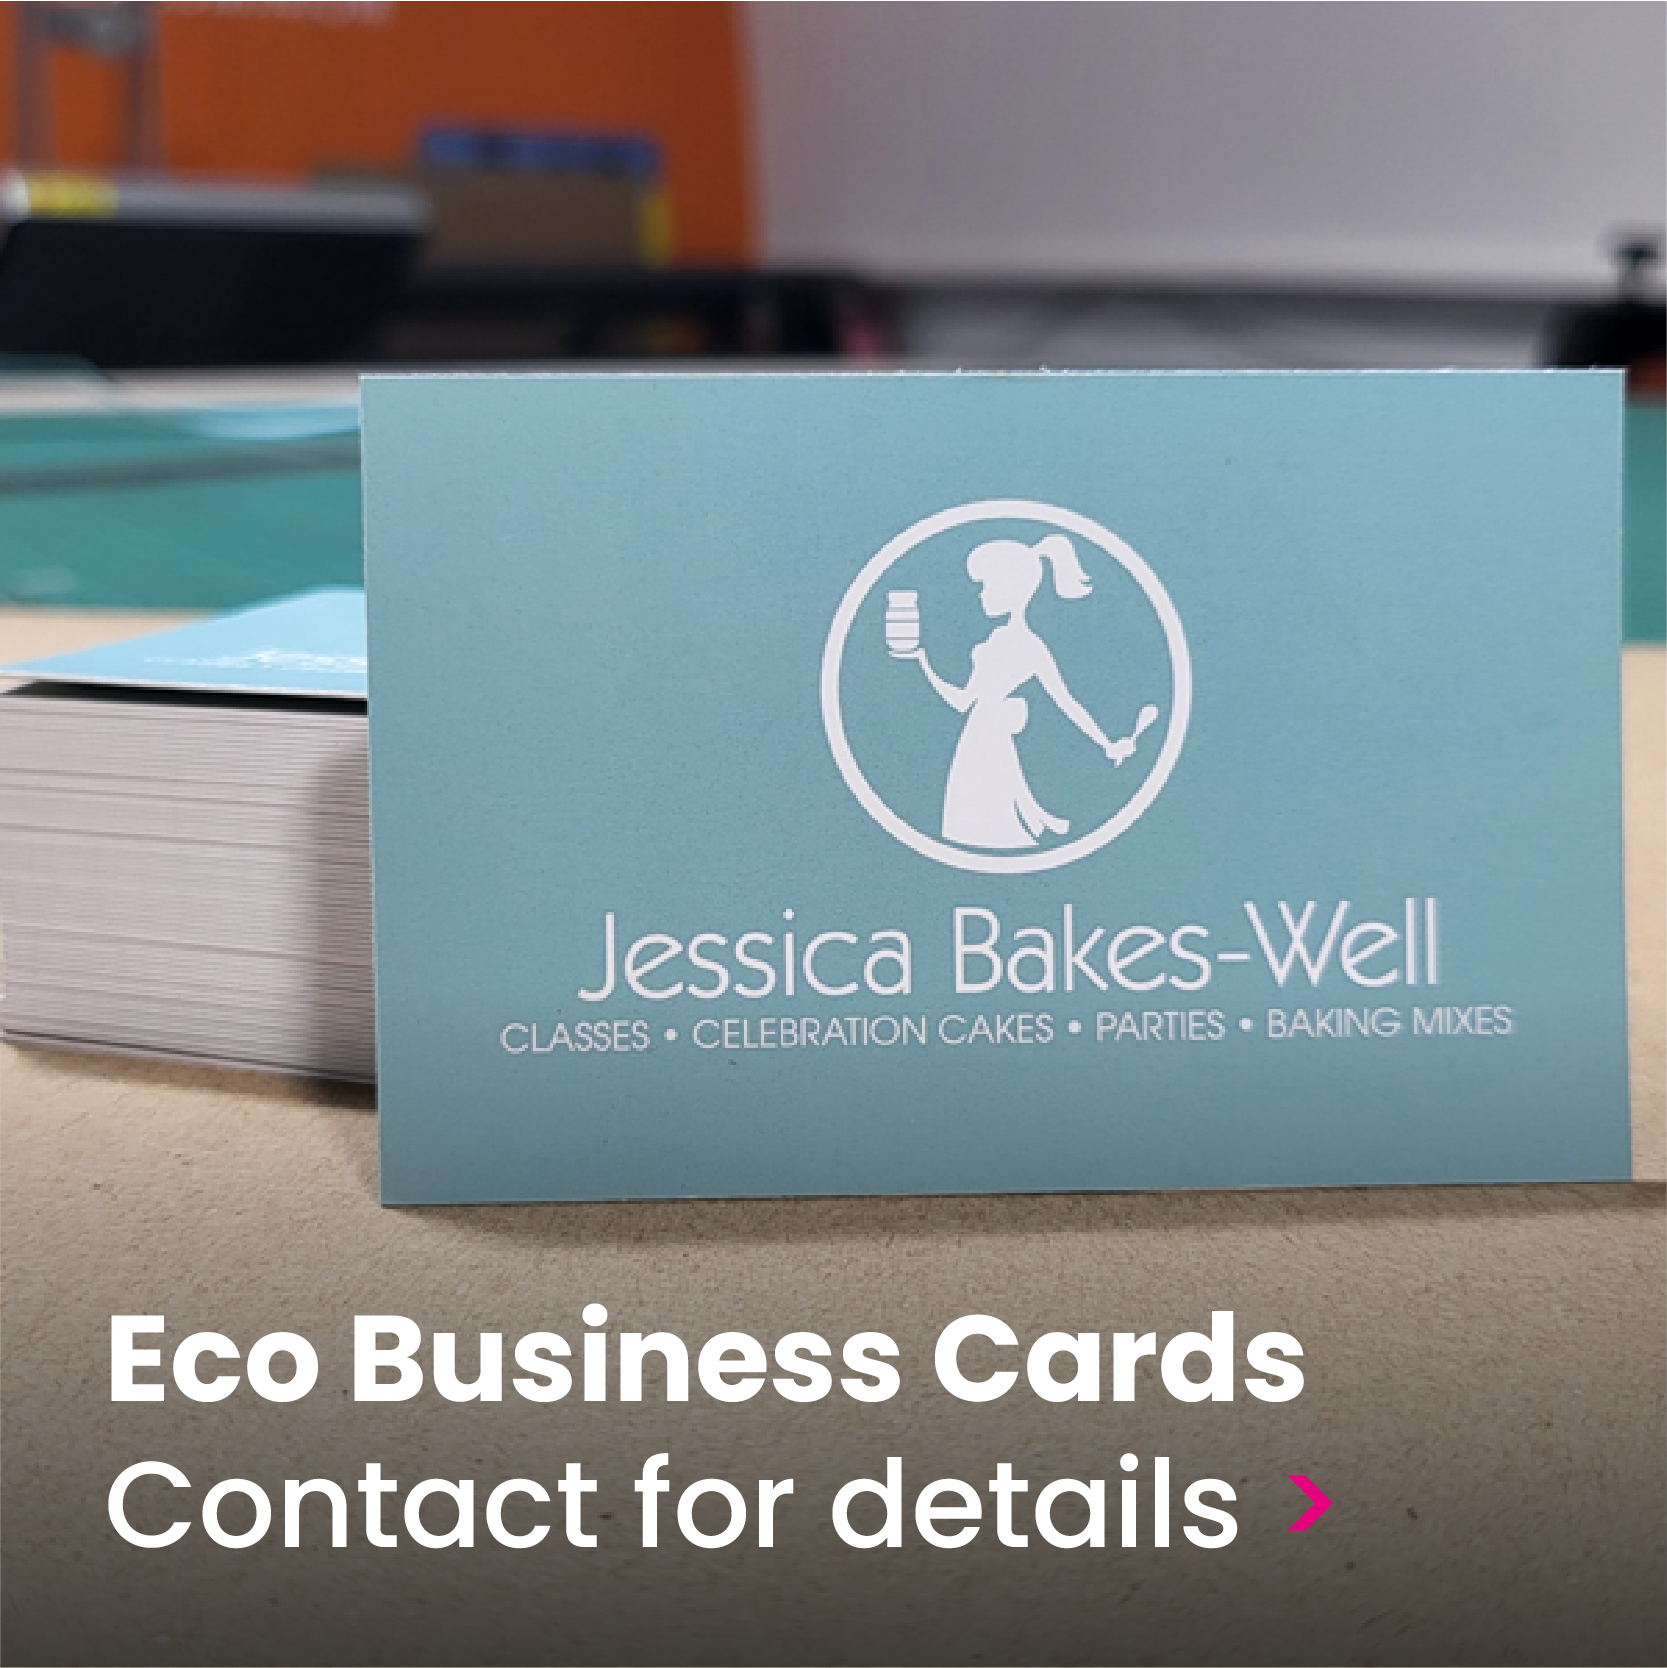 Eco business cards, using recyled lamination